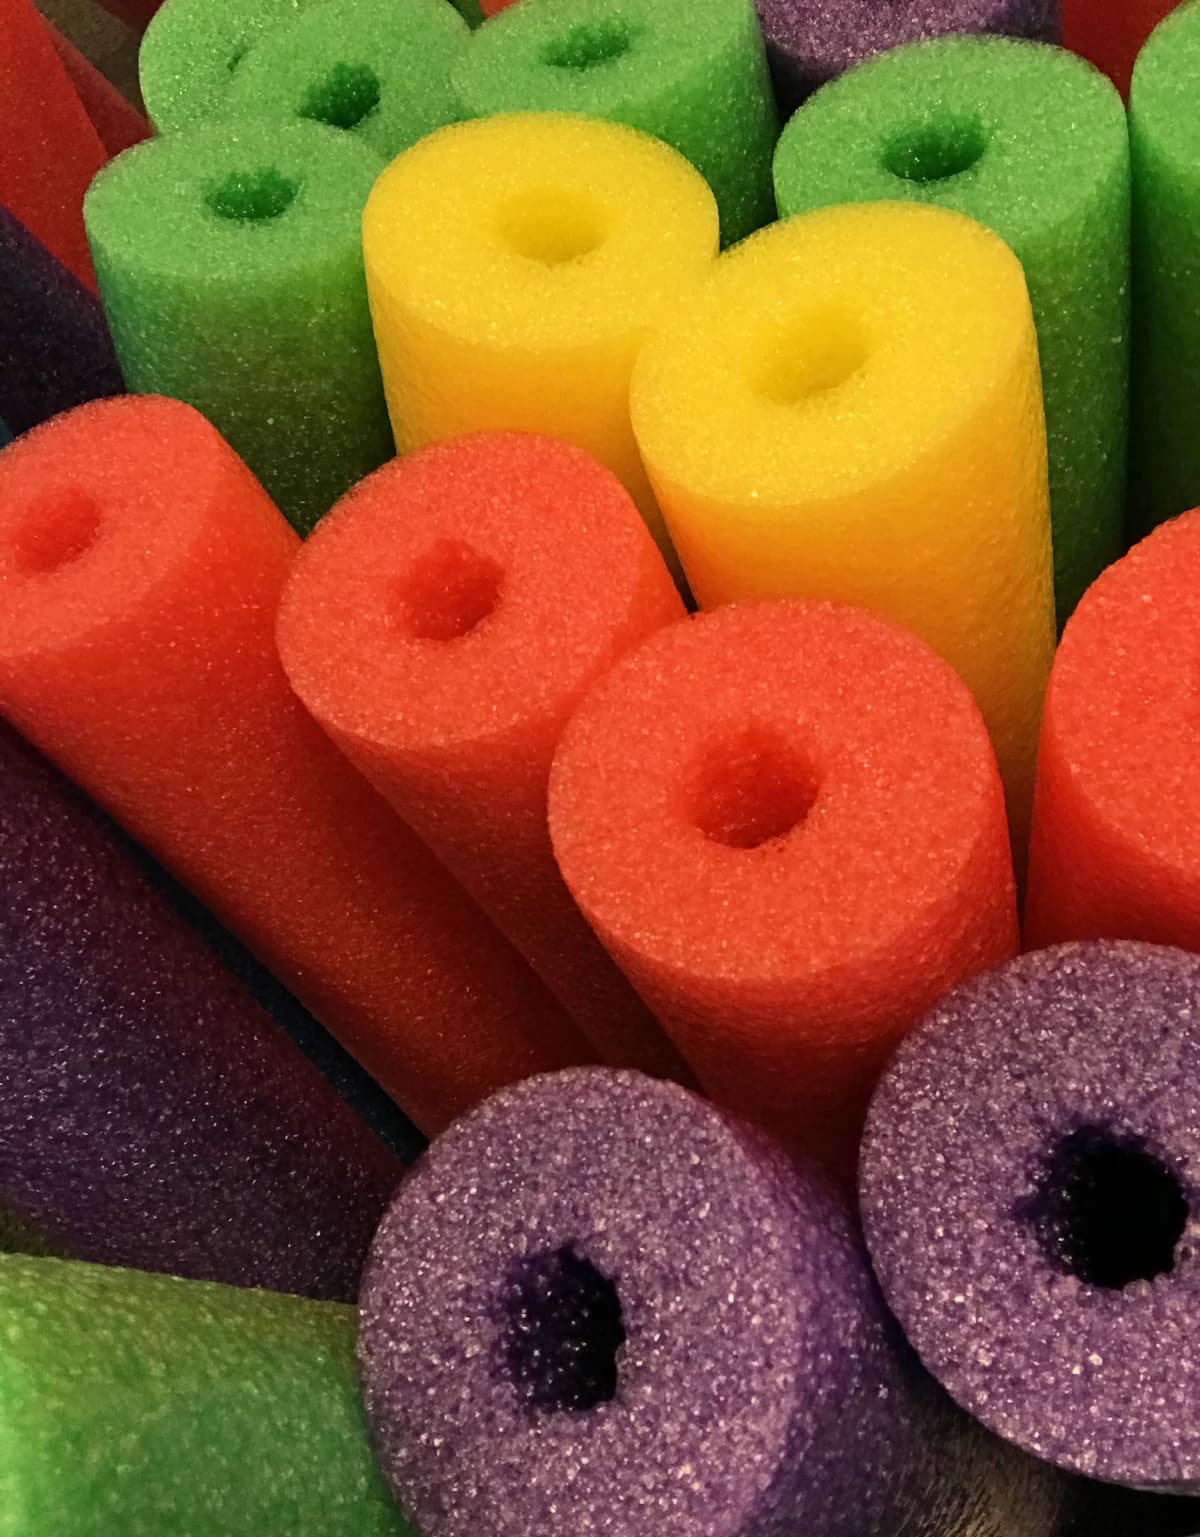 An assortment of colorful pool noodles